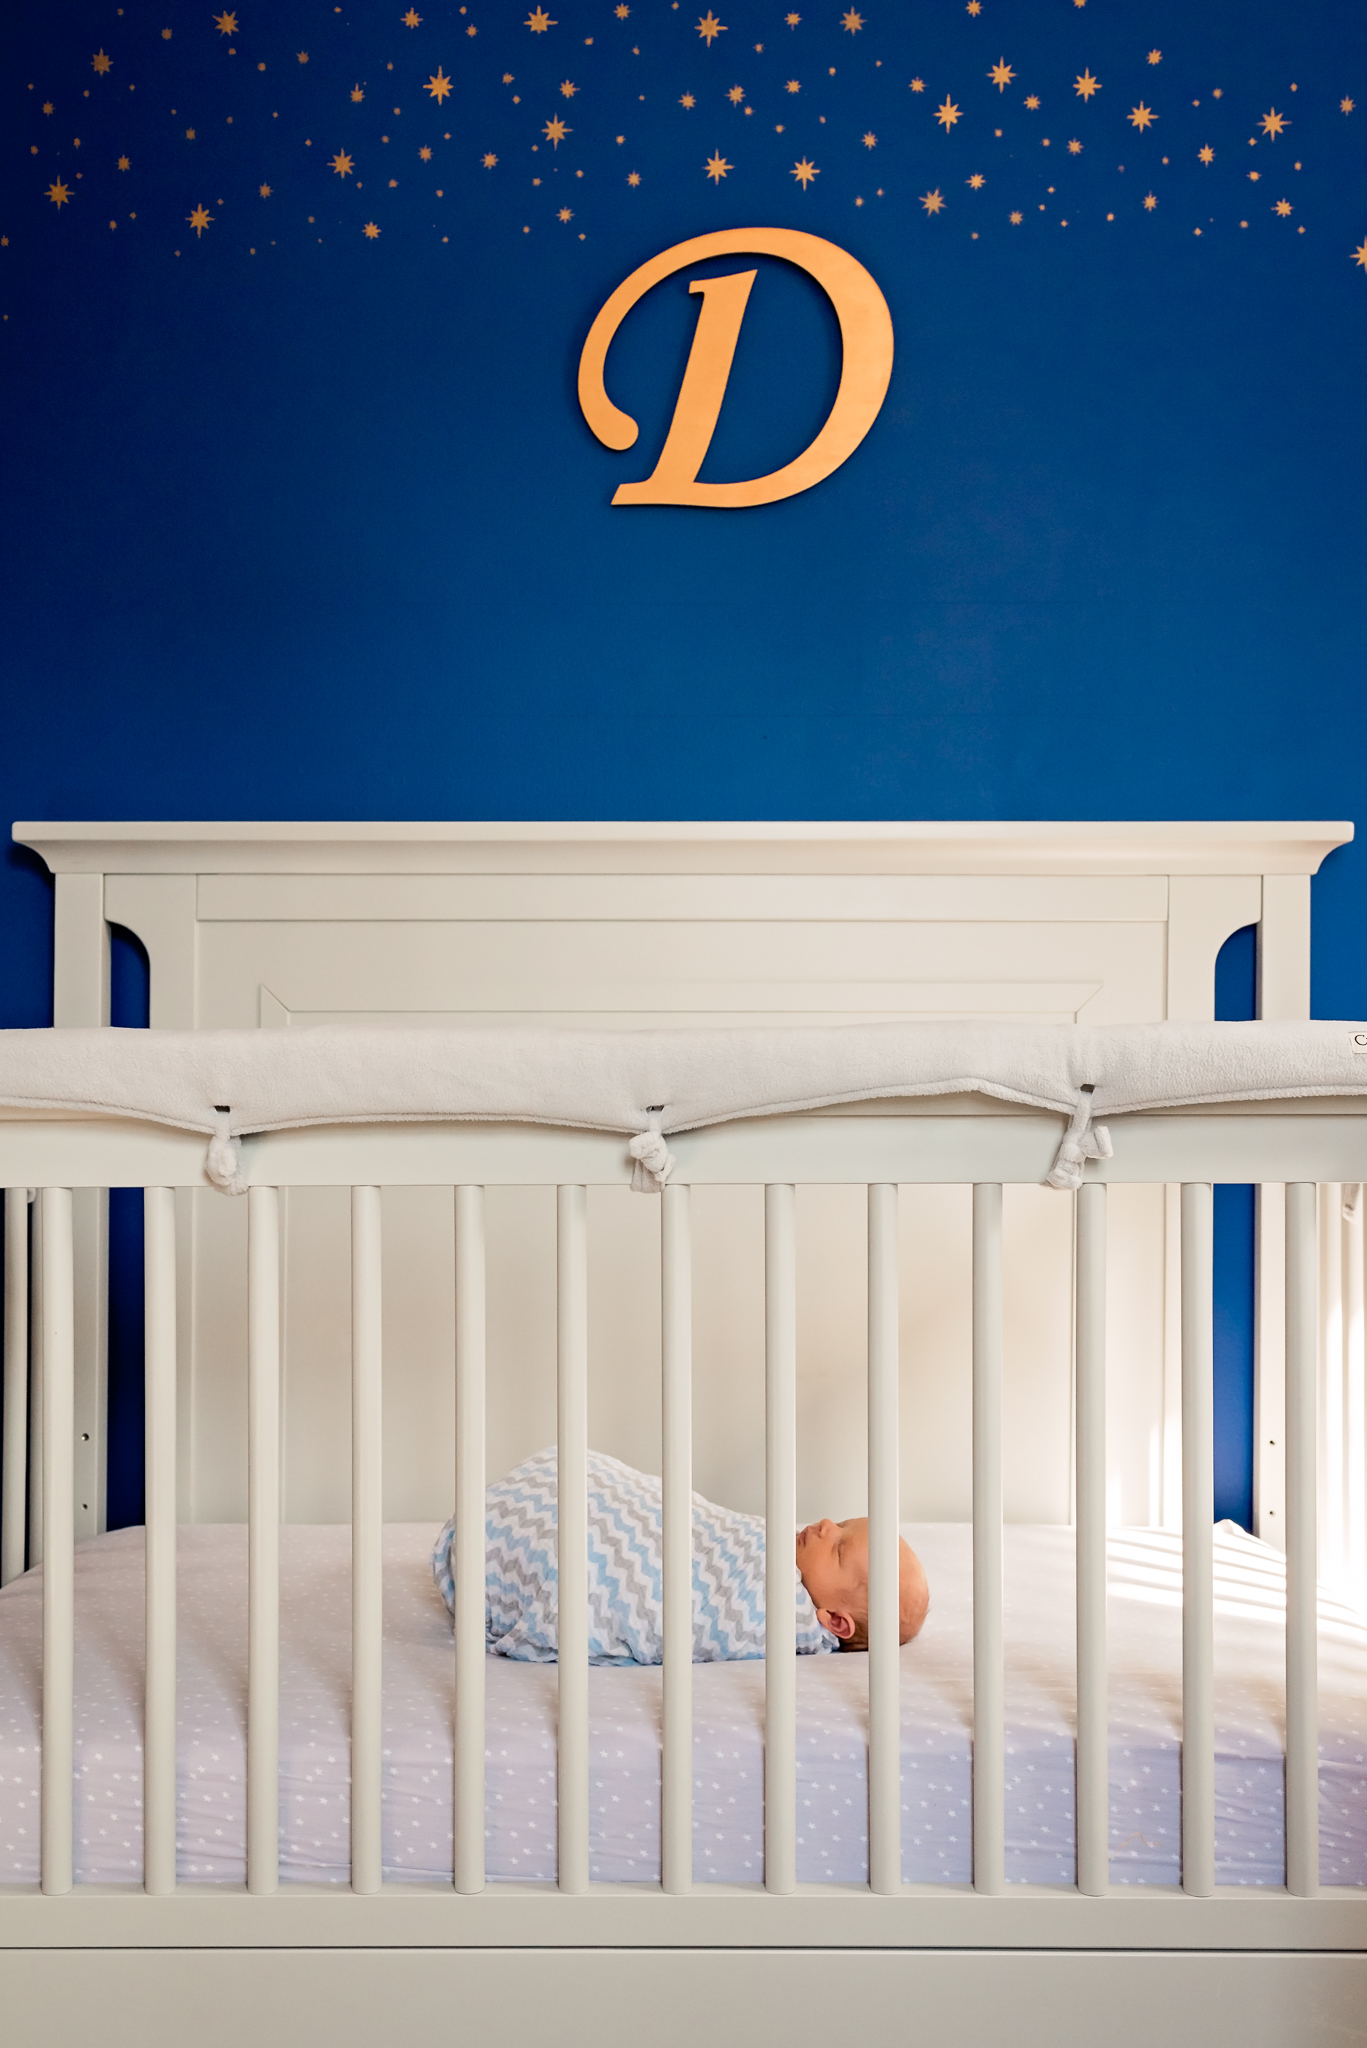 nursery setup Valley Village Newborn Pictures letter D on the wal